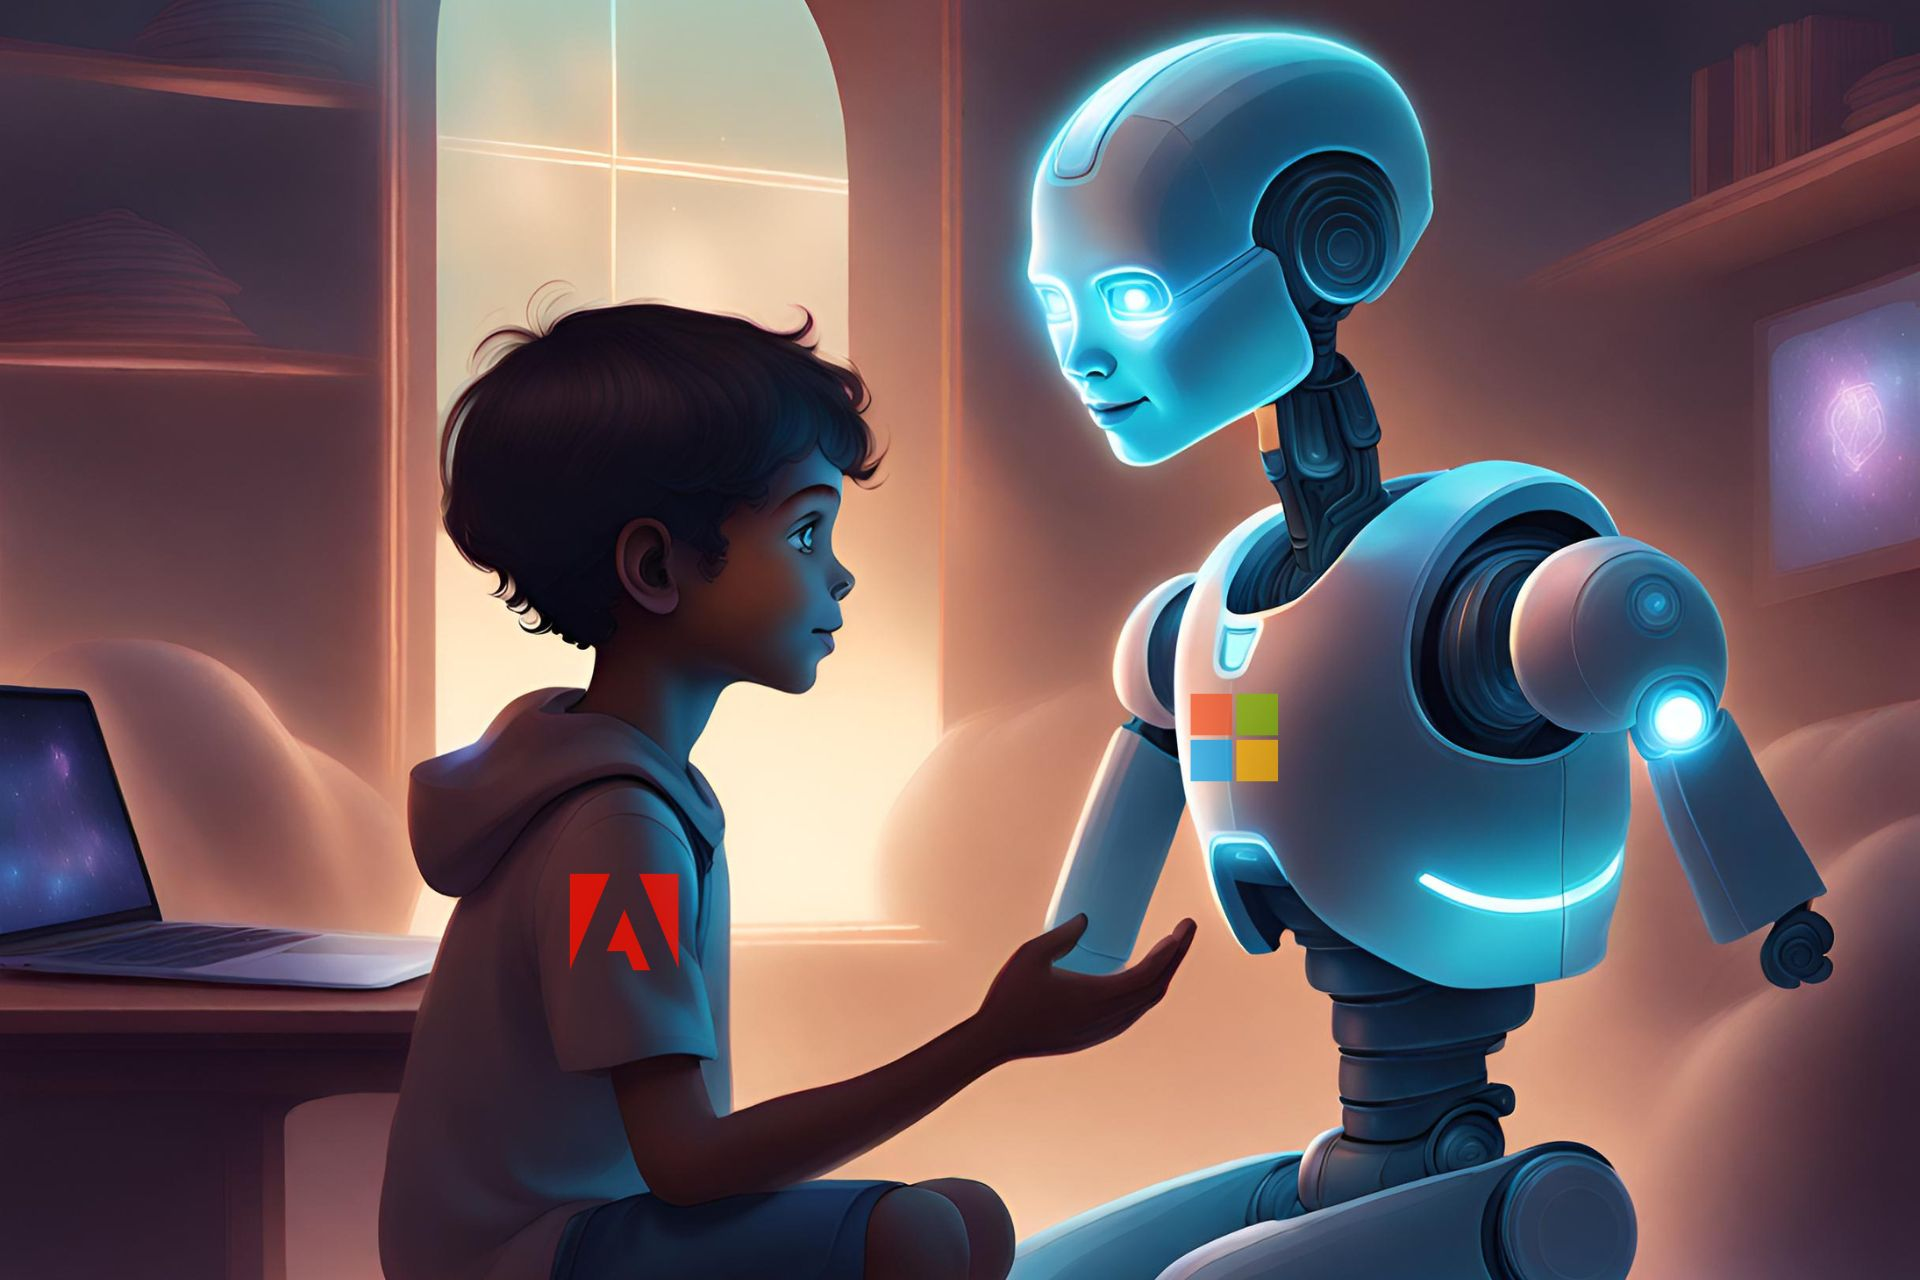 A kid with an Adobe hoodie working together with Microsoft AI